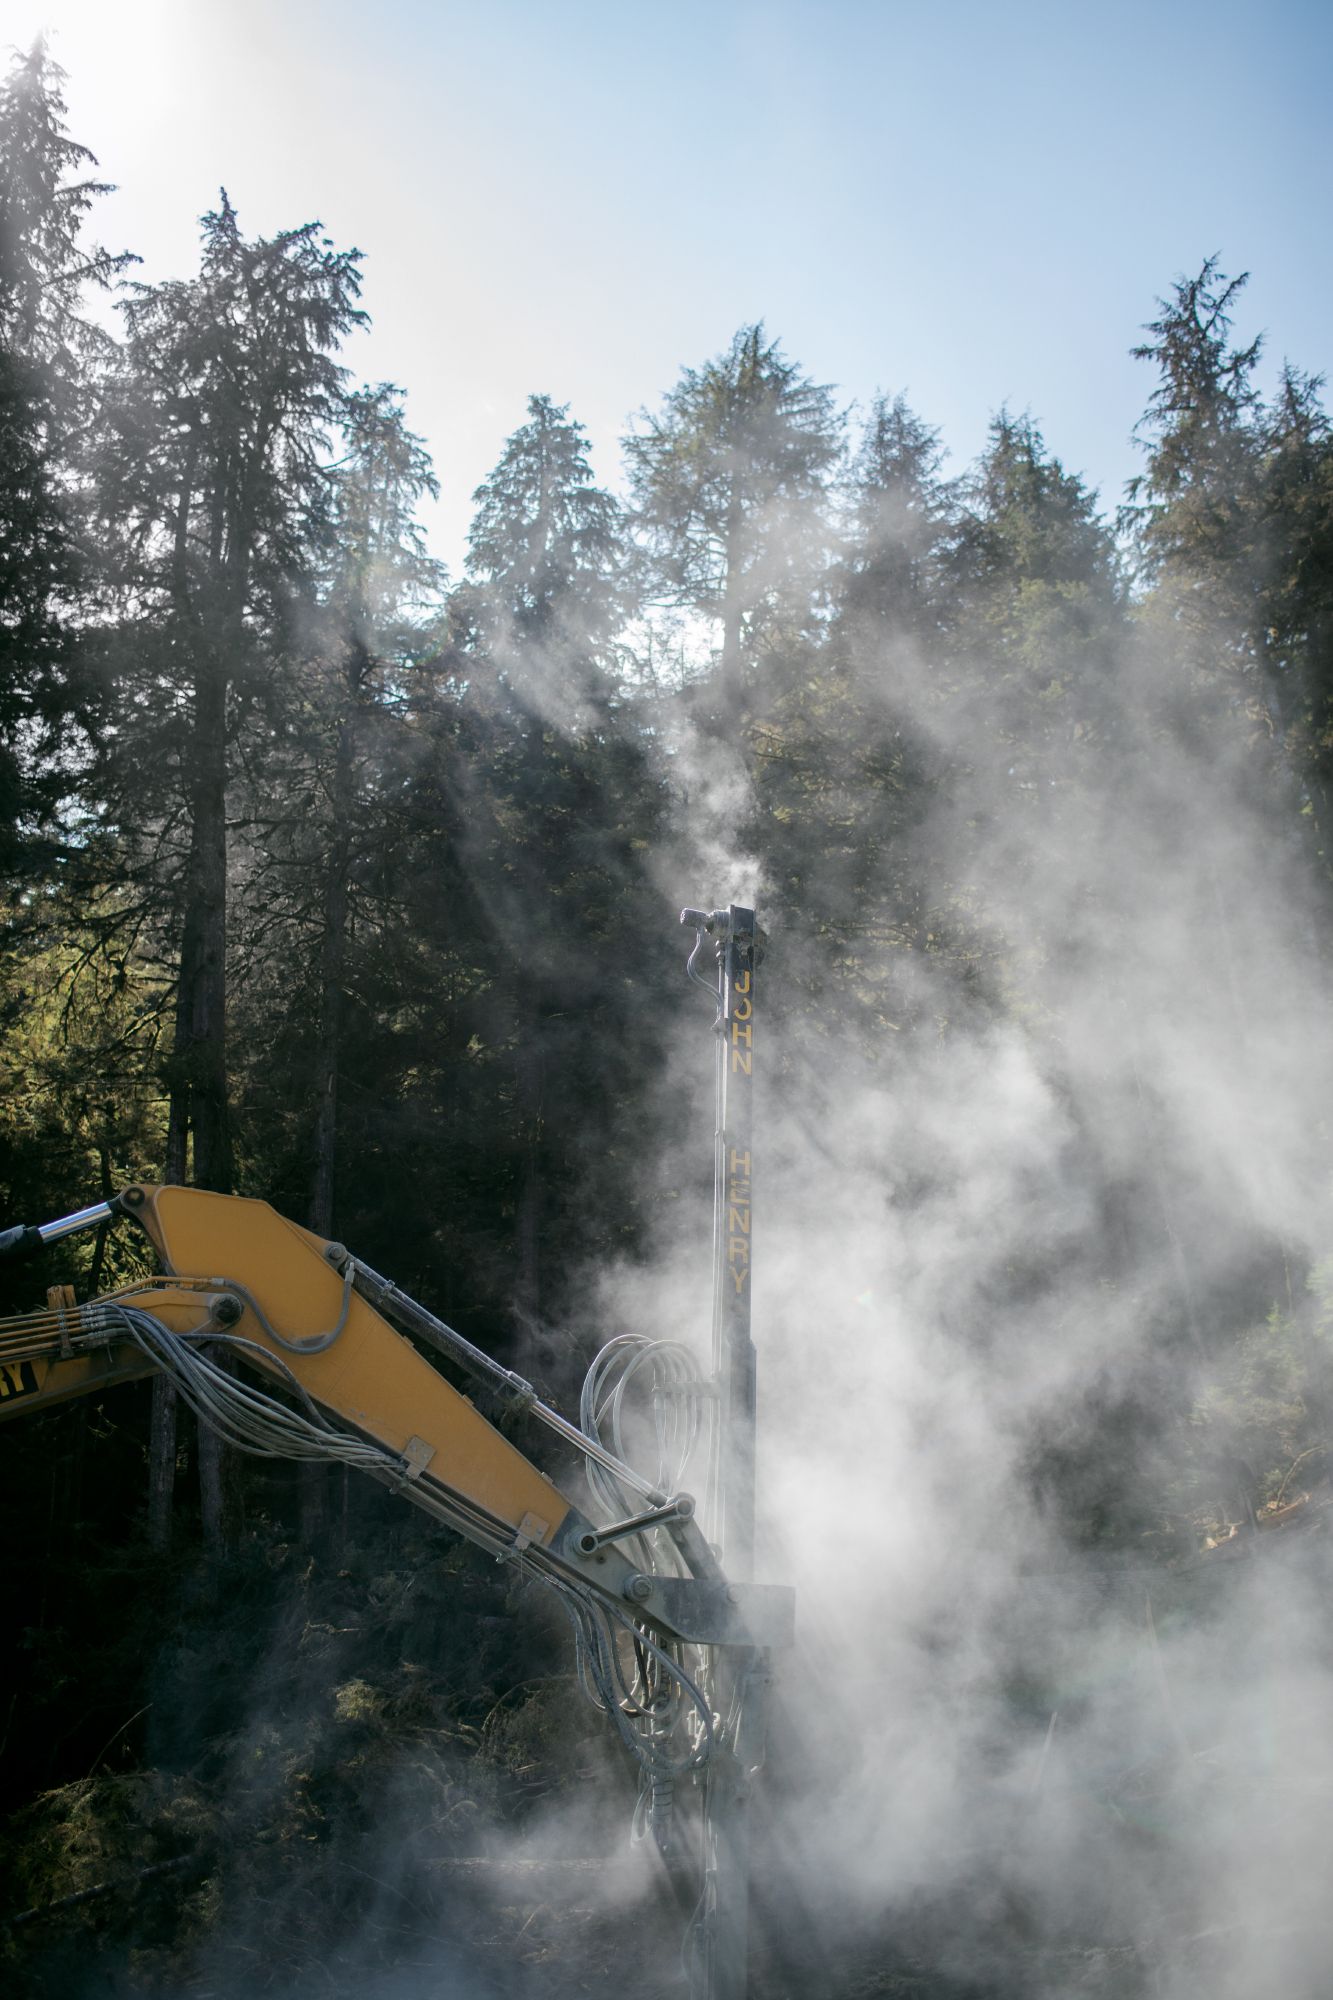 A blasting and road building team works at McKenzie Inlet, owned by the Sealaska Native Corporation. Image by Joshua Cogan. United States, 2019.